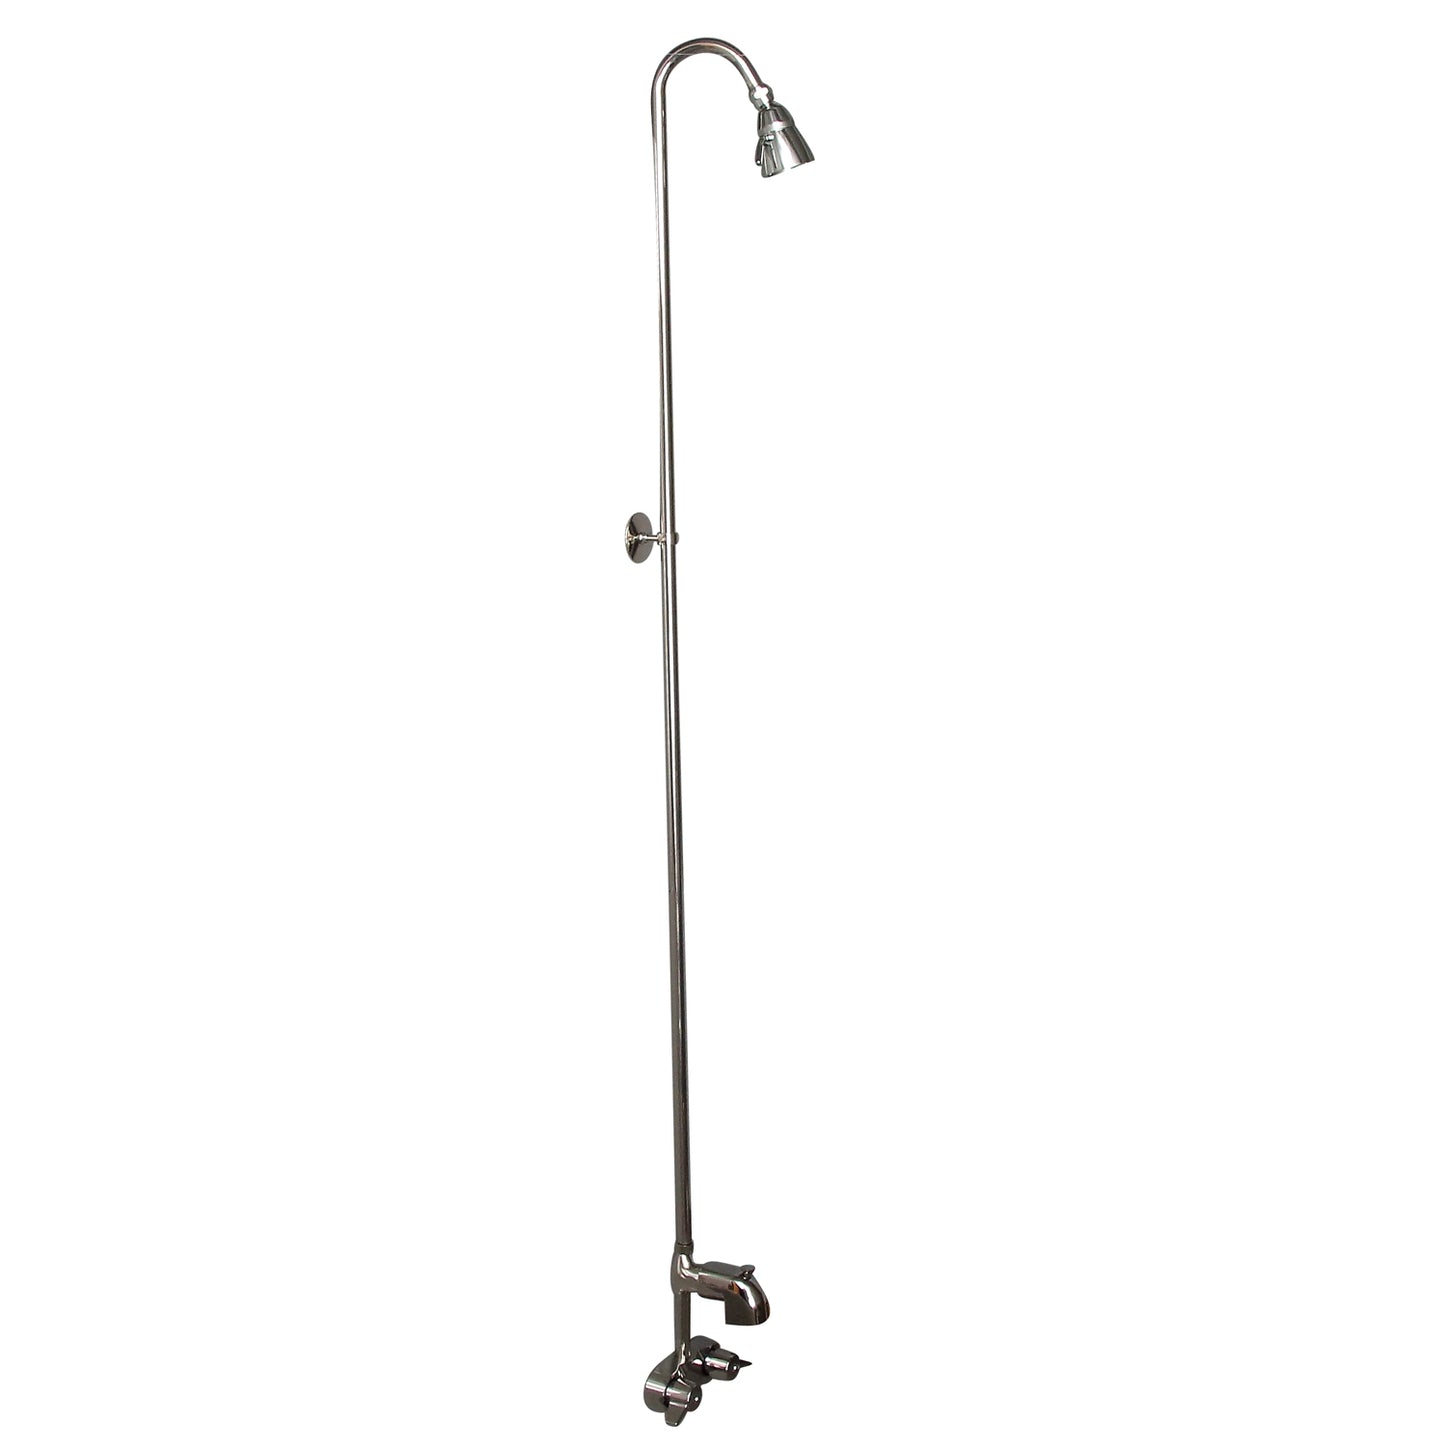 Two-Handle Traditional Tub Faucet with 56" Riser & Shower Head in Polished Nickel